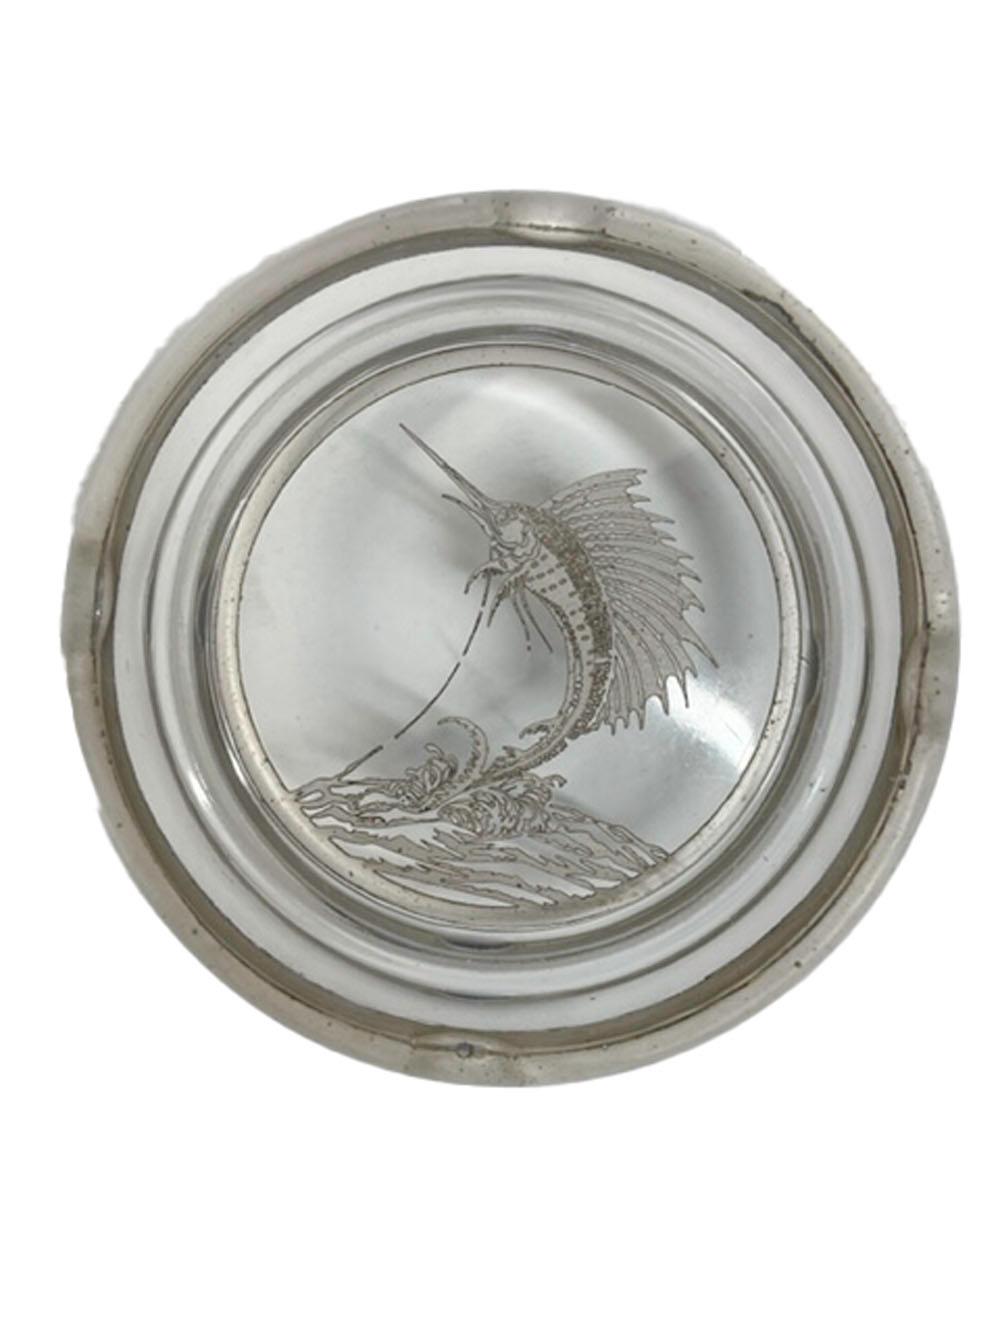 20th Century Art Deco, Rockwell Silver Overlay Clear Glass Ashtray with Marlin/Sailfish Motif For Sale